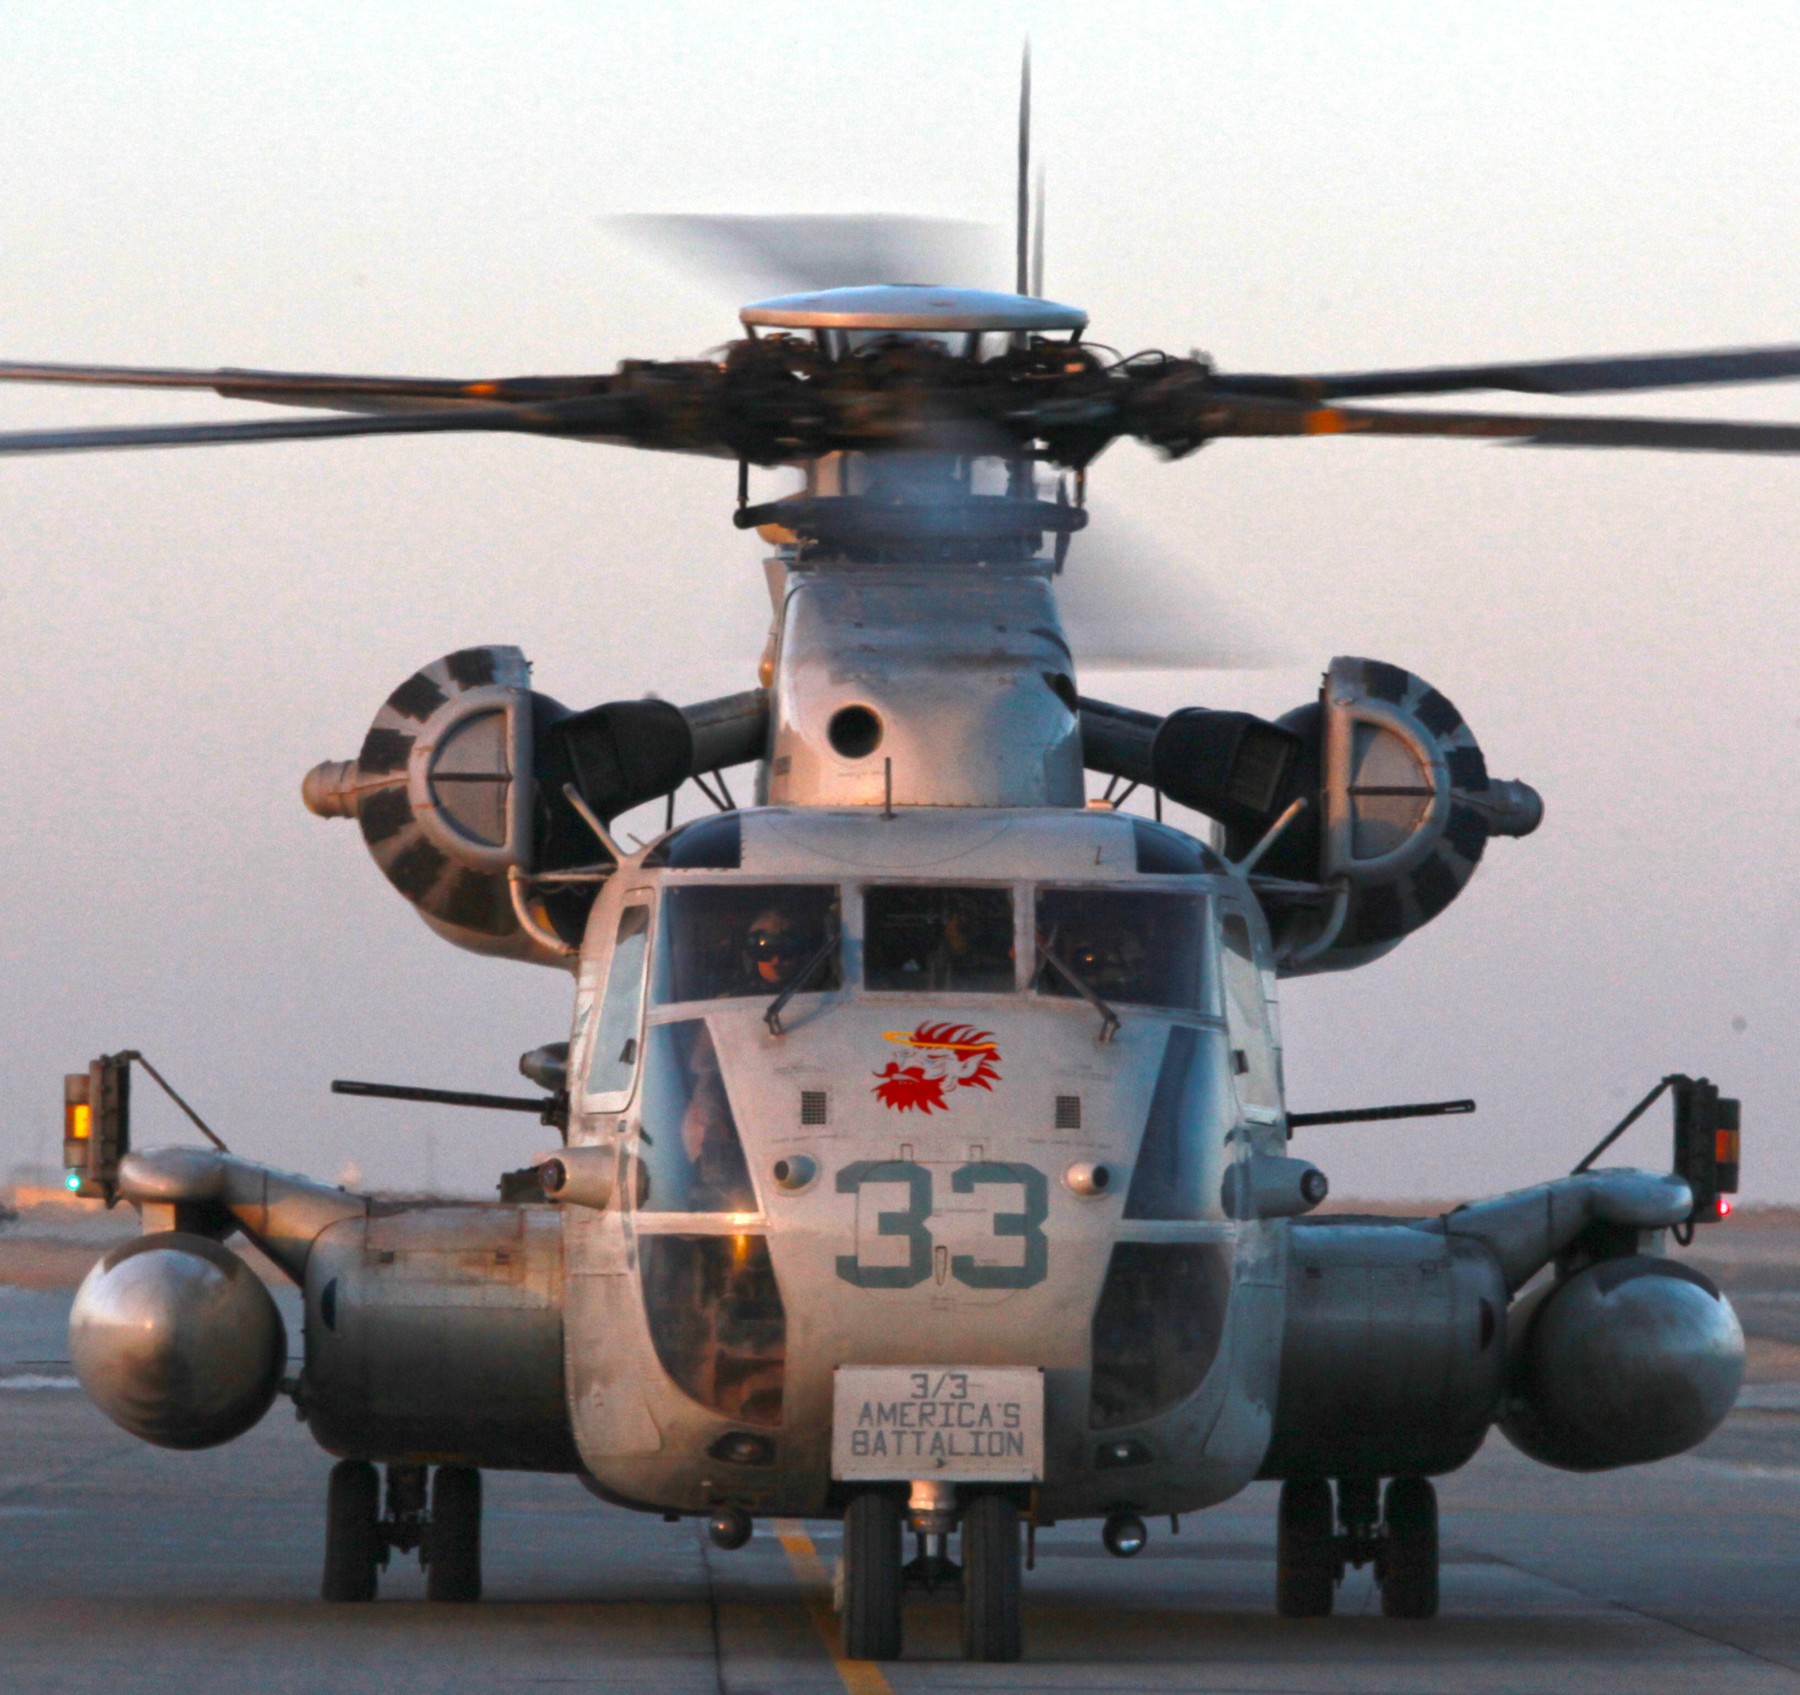 hmh-362 ugly angels marine heavy helicopter squadron usmc sikorsky ch-53d sea stallion 14 camp leatherneck